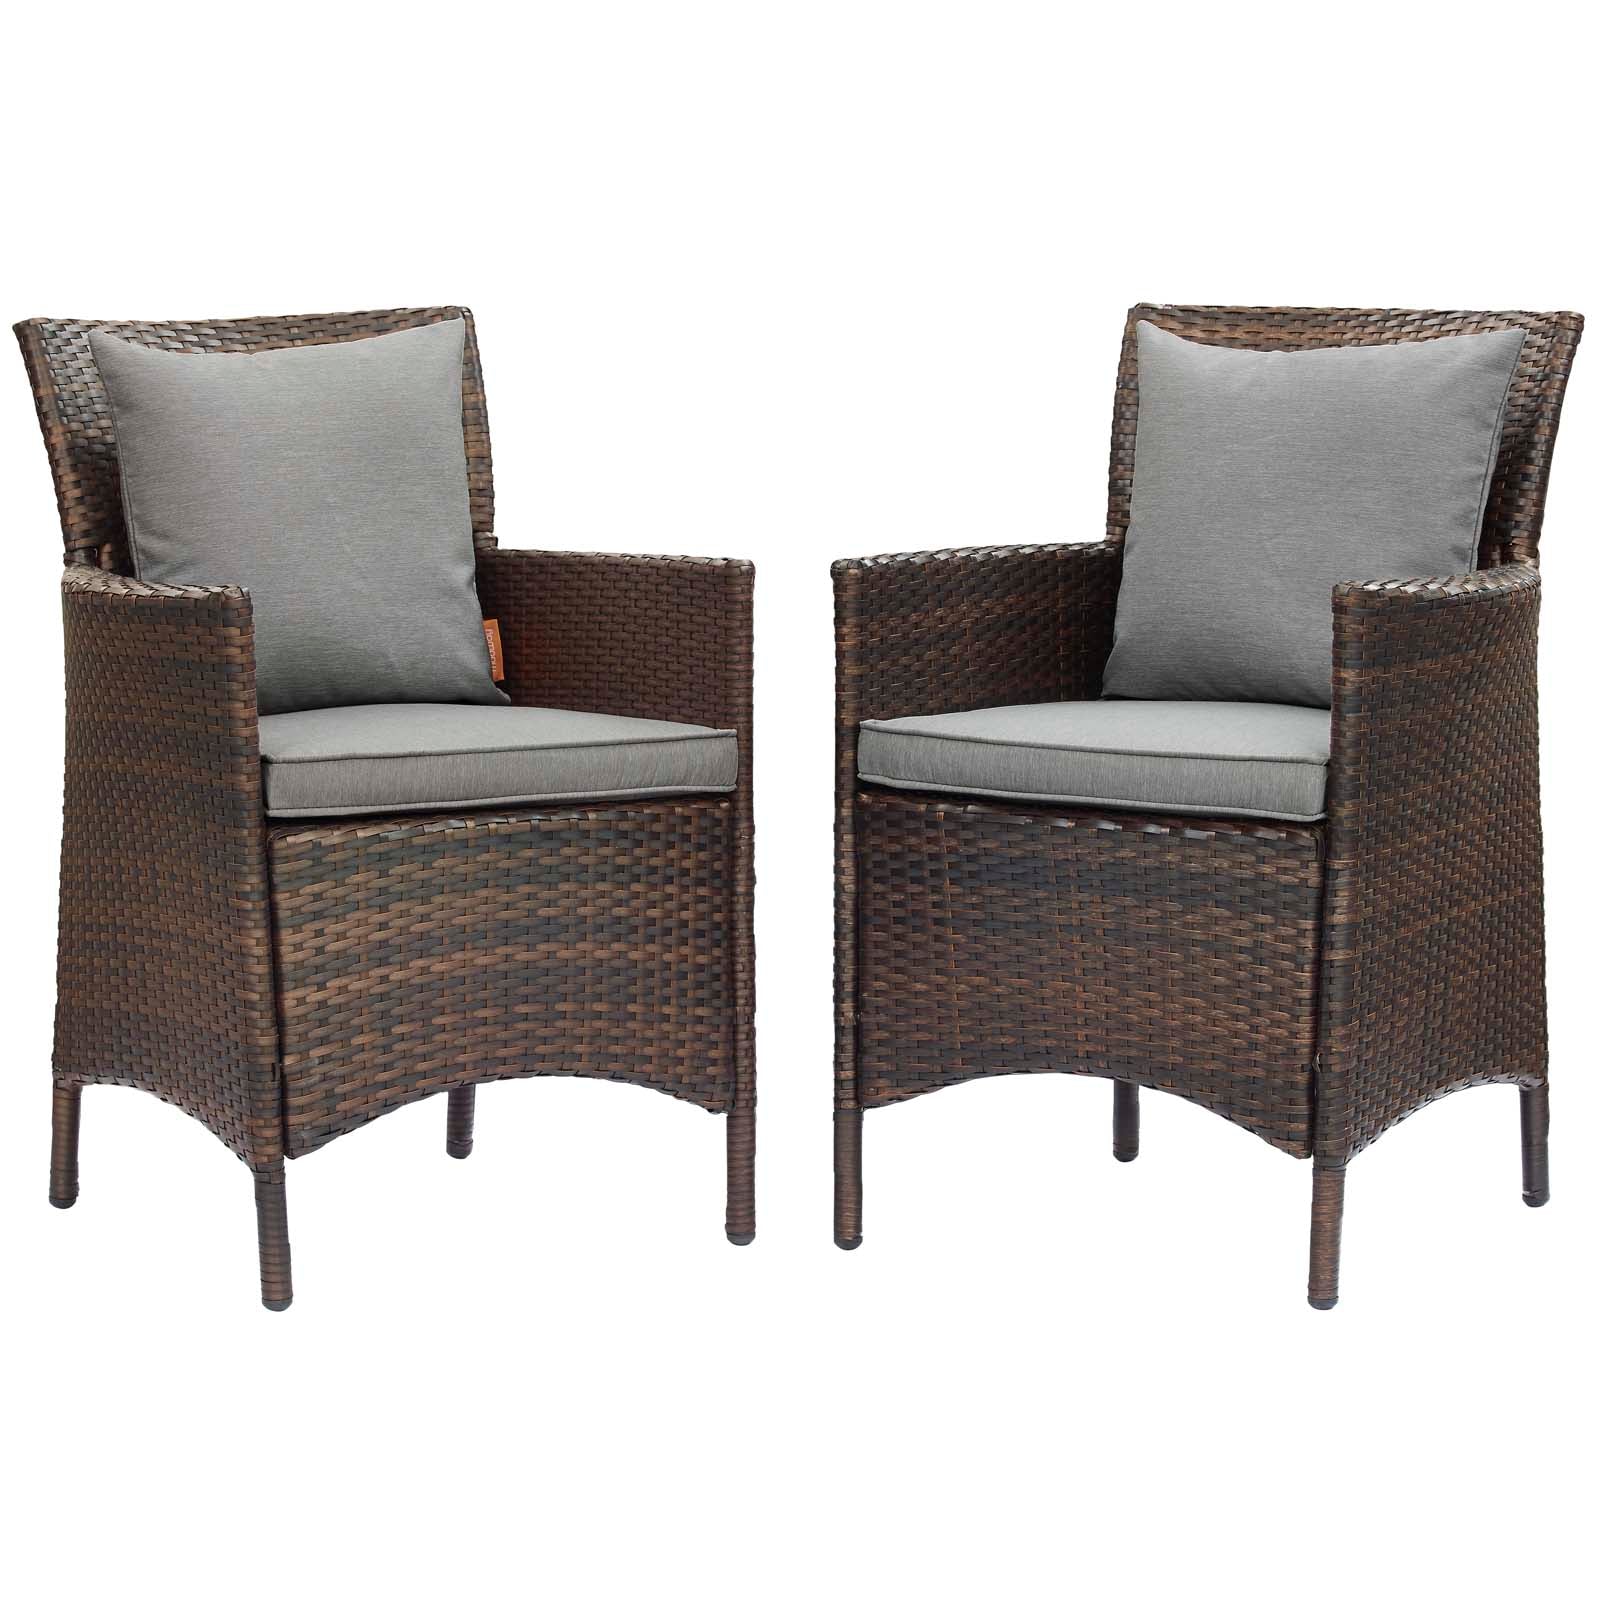 Modway Outdoor Chairs - Conduit Outdoor Patio Wicker Rattan Dining Armchair (Set of 2) Brown Gray